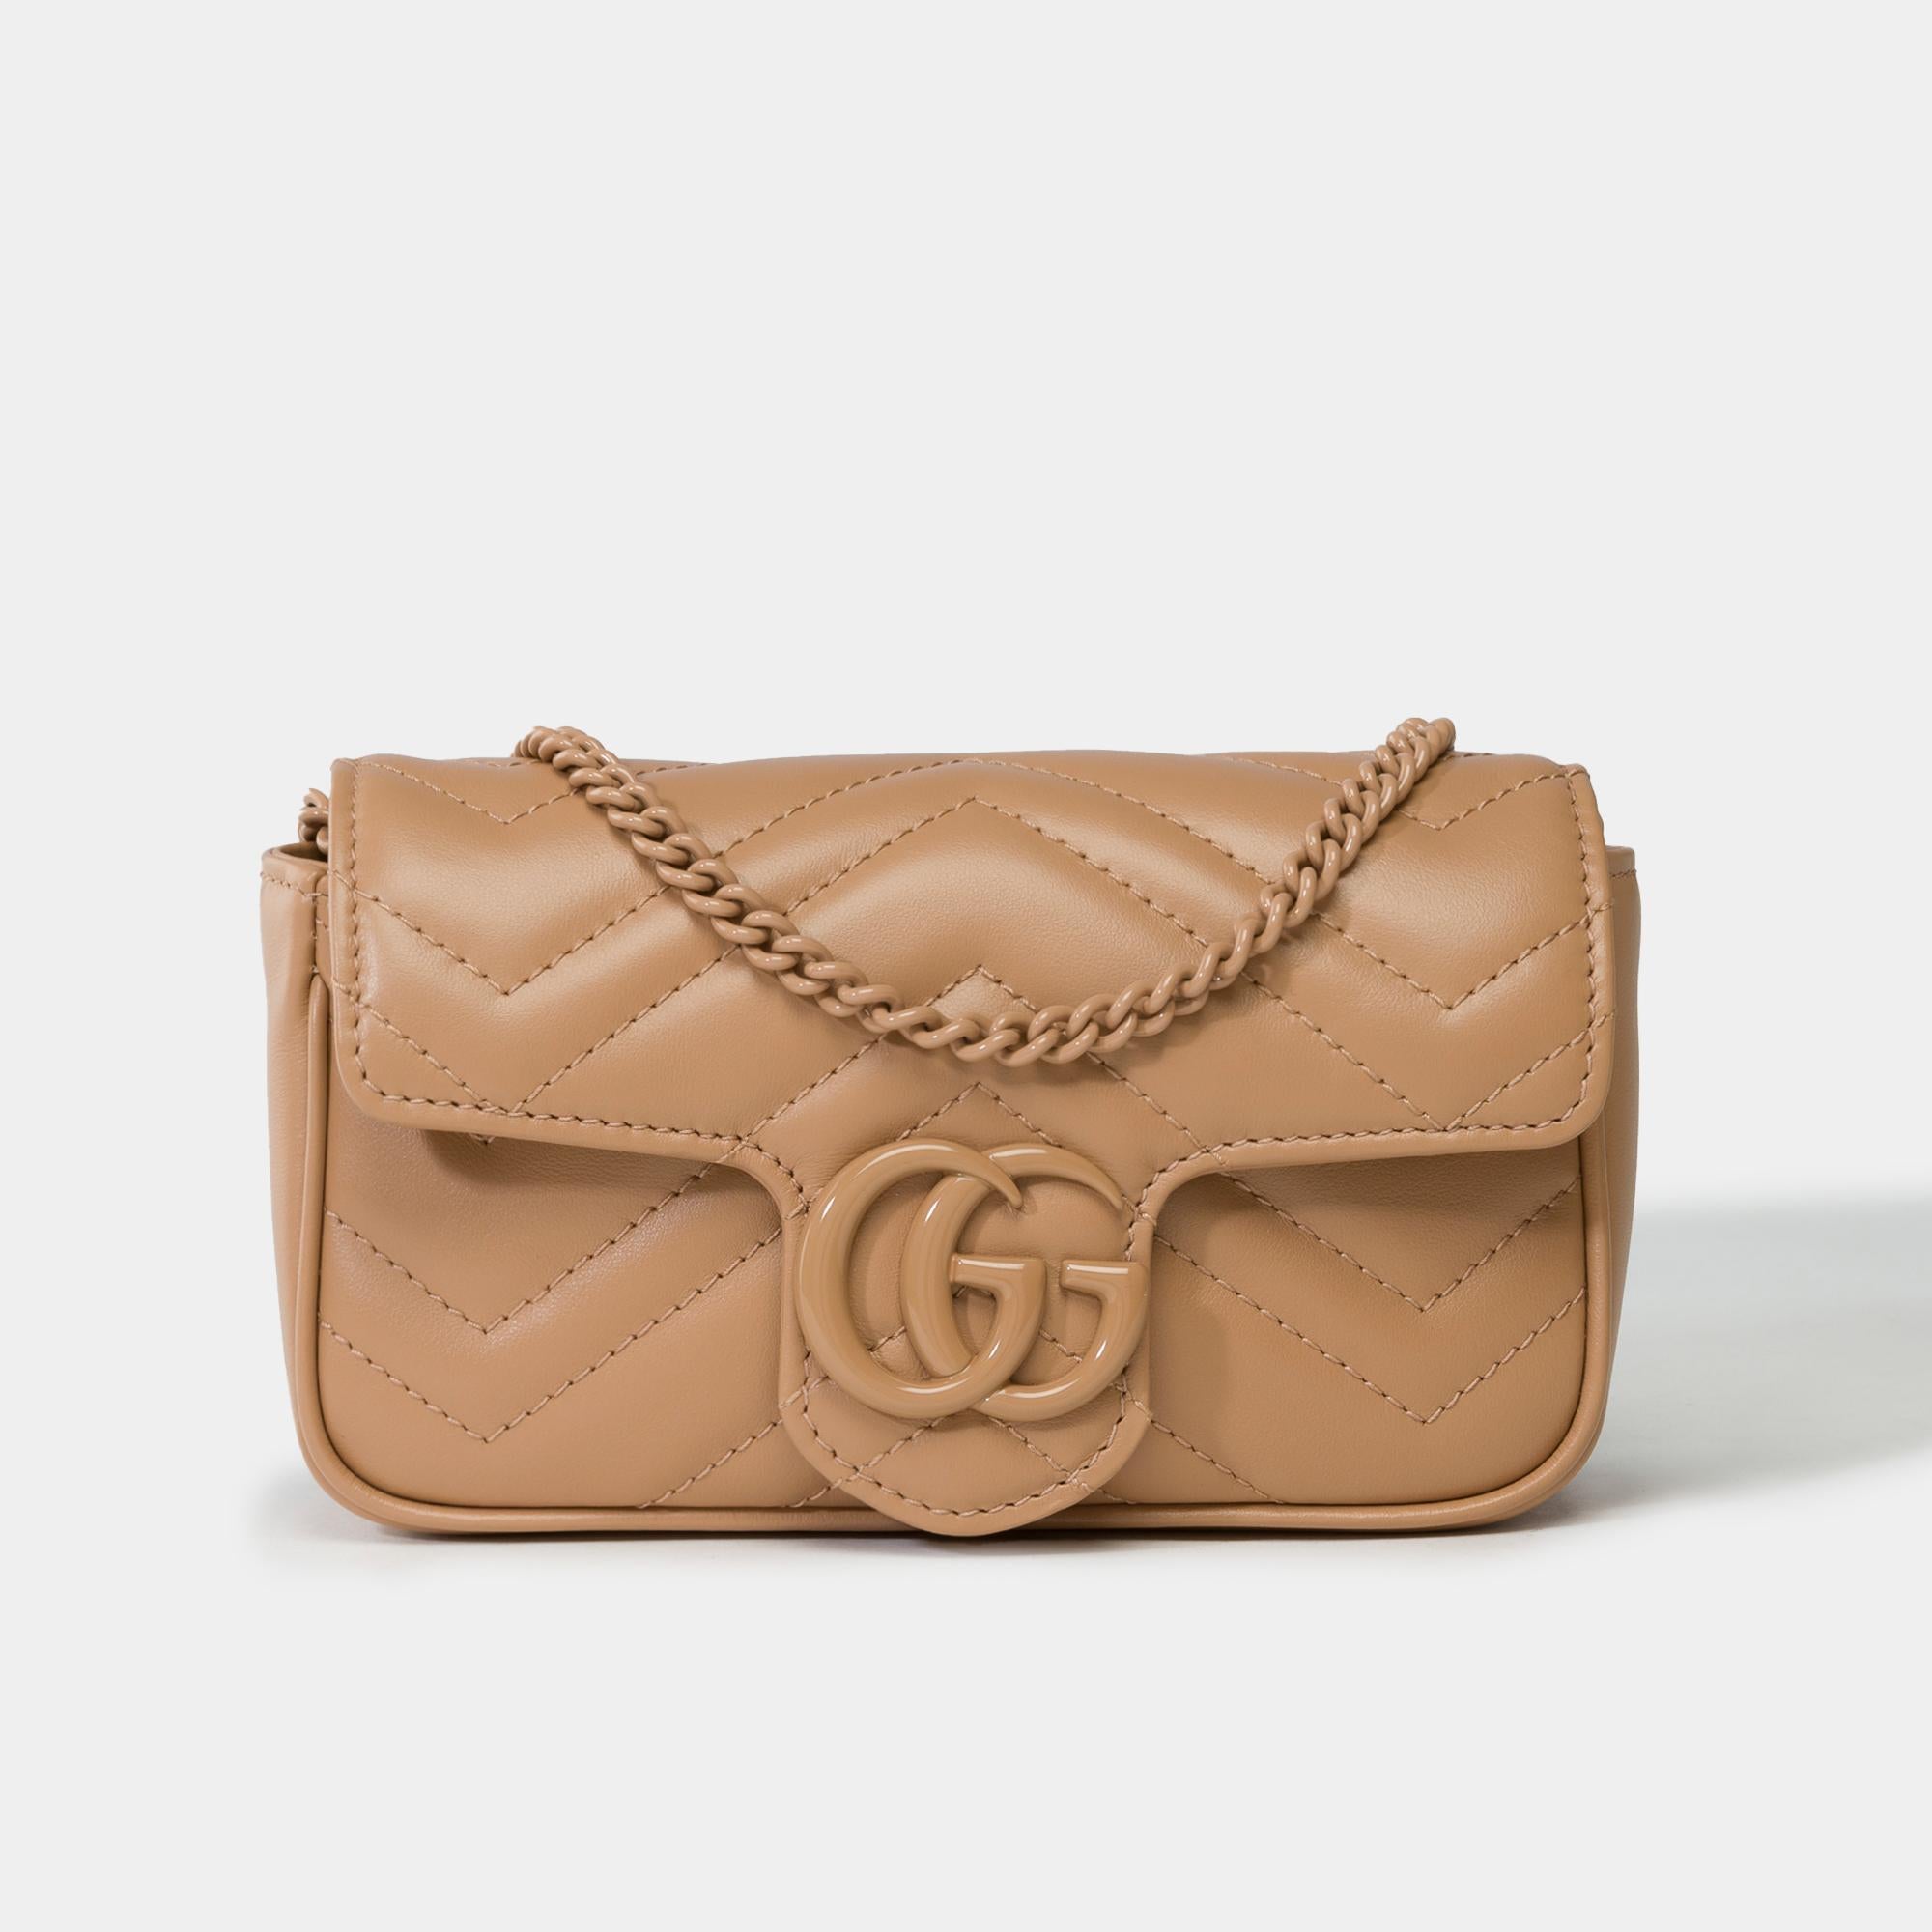 Elegant​ ​Gucci​ ​GG​ ​Marmont​ ​Mini​ ​shoulder​ ​bag​ ​in​ ​beige​ ​quilted​ ​leather,​ ​beige​ ​metal​ ​trim,​ ​convertible​ ​chain​ ​handle​ ​in​ ​beige​ ​metal​ ​for​ ​hand​ ​or​ ​shoulder​ ​or​ ​crossbody​ ​carry

Magnetic​ ​flap​